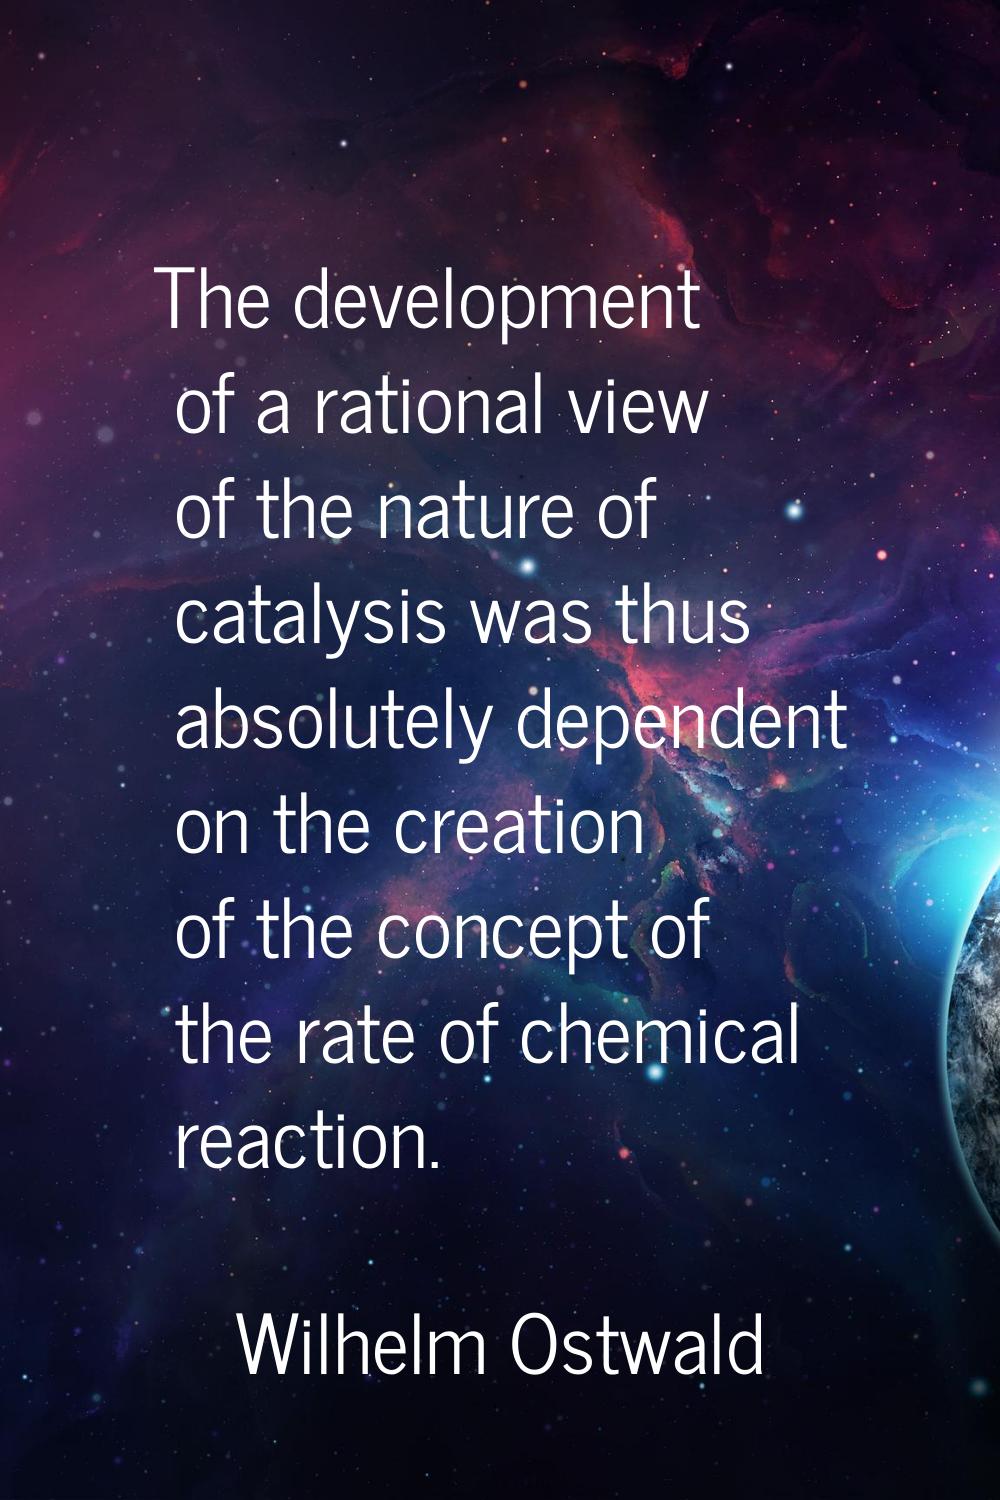 The development of a rational view of the nature of catalysis was thus absolutely dependent on the 